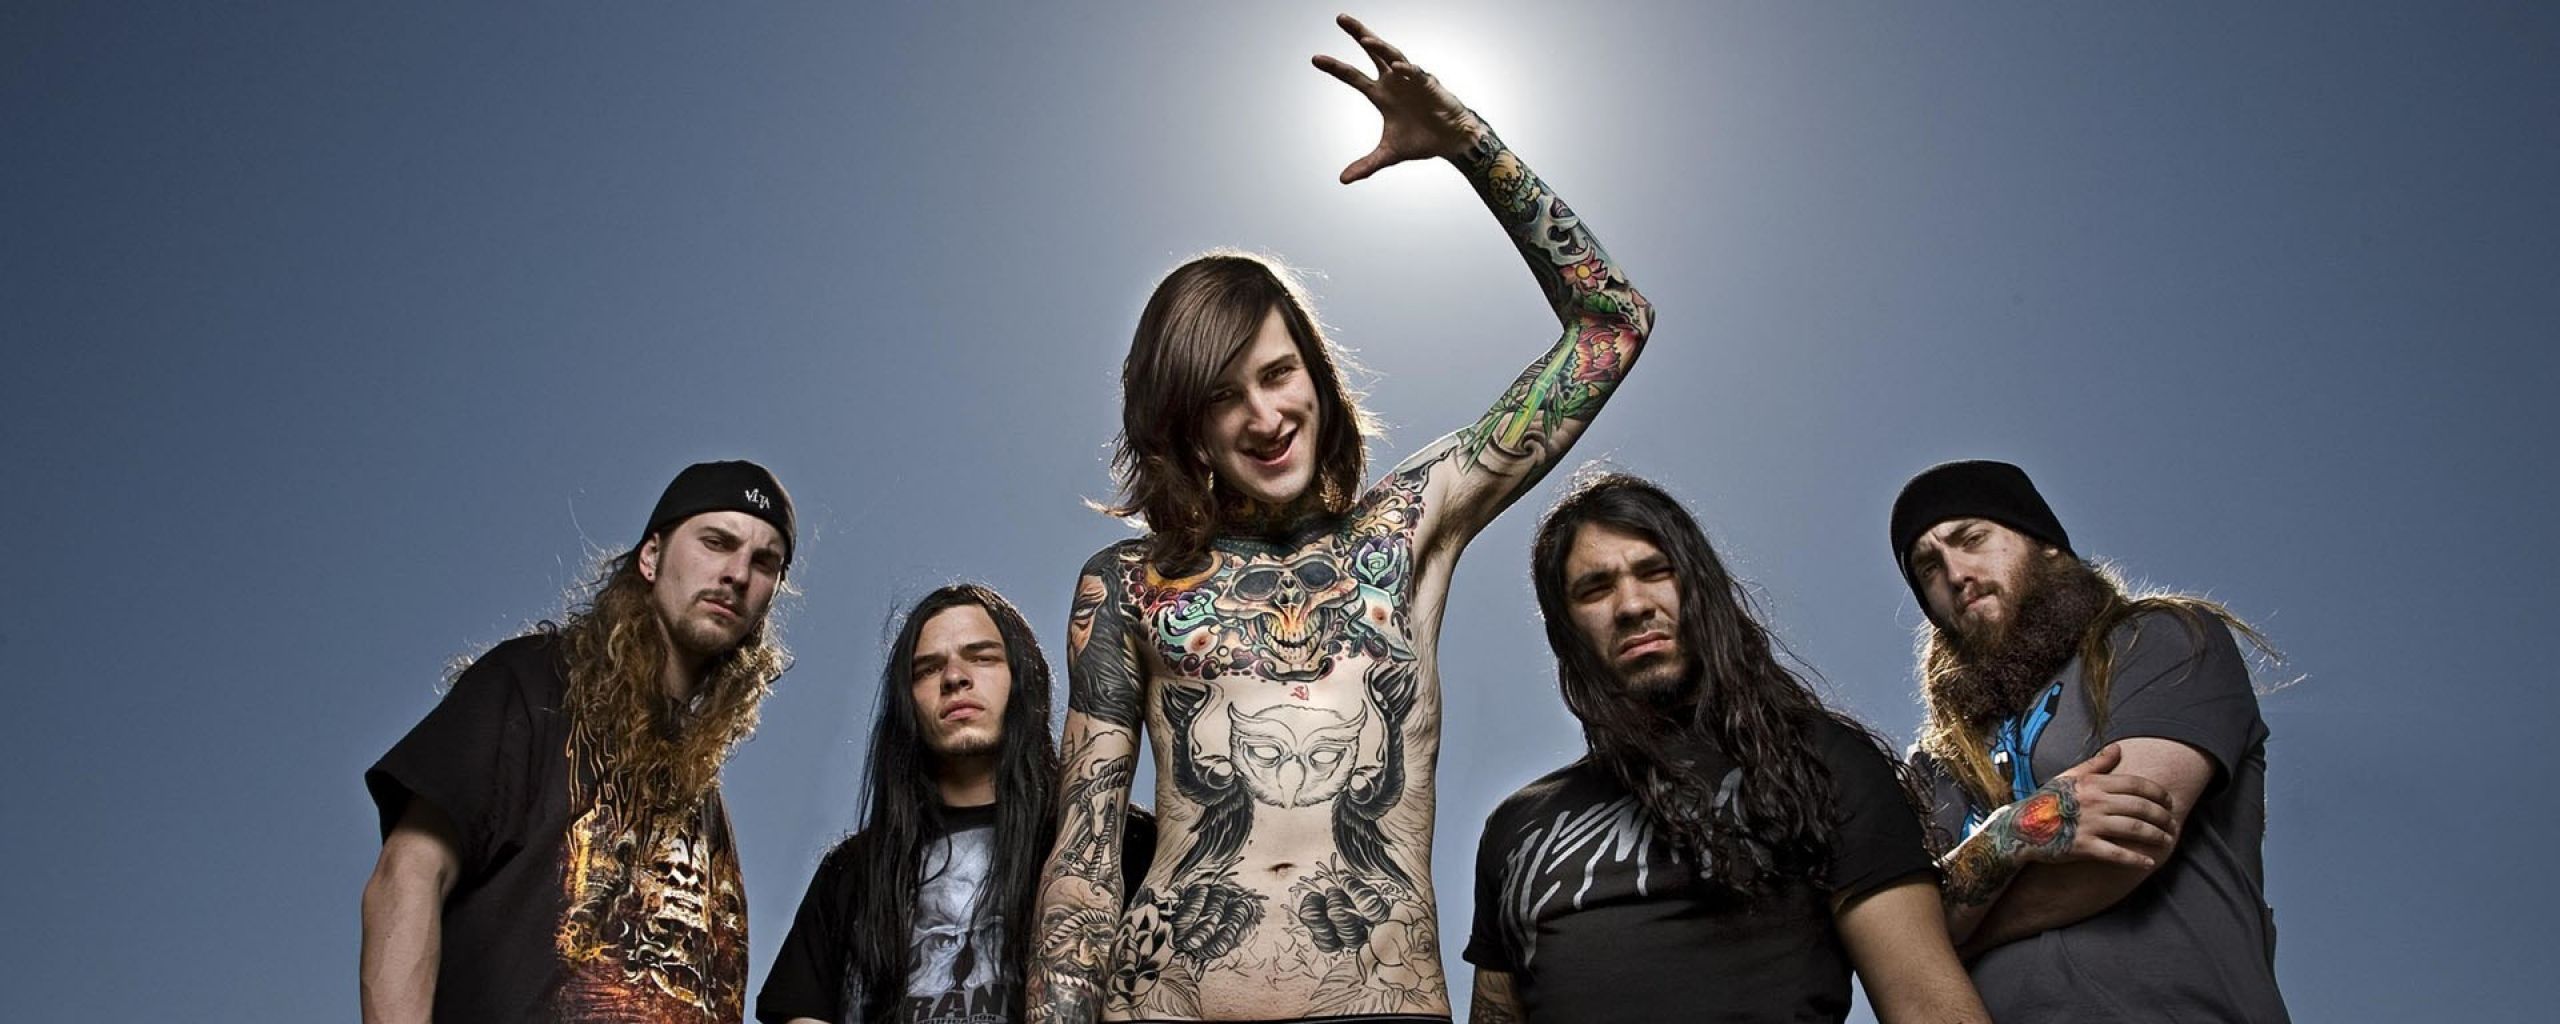 Download Wallpaper 2560x1024 Suicide silence, Tattoo, Rockers, Sky ...